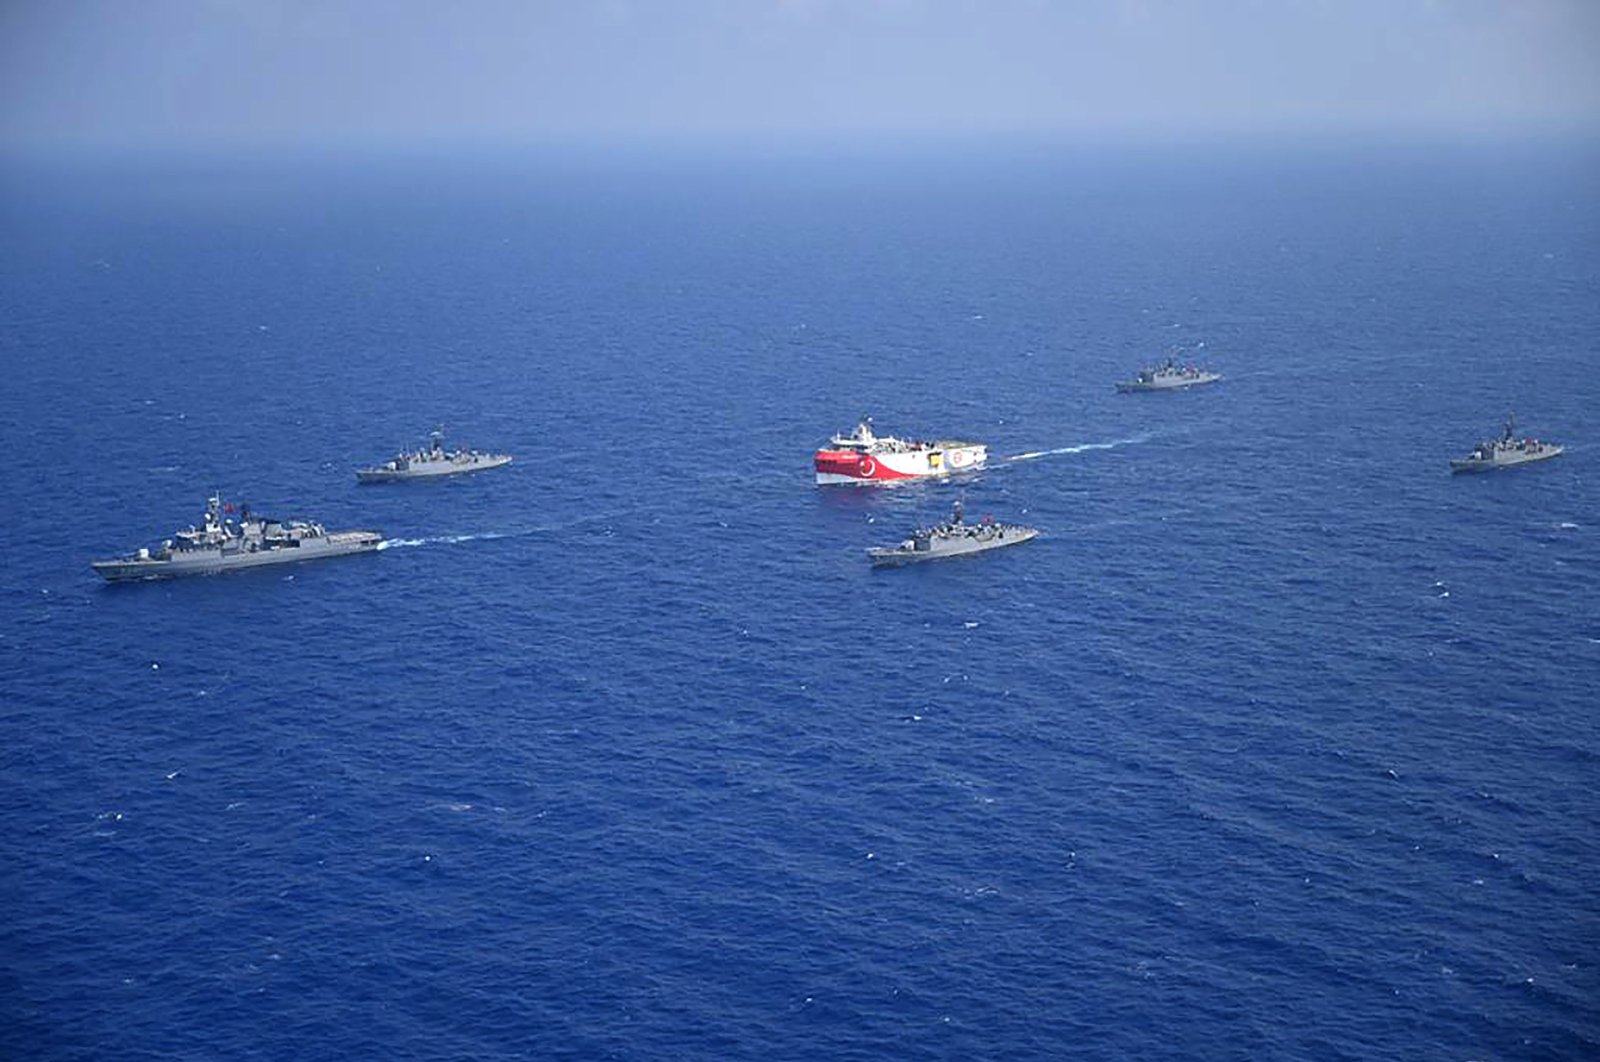 Turkish seismic research vessel Oruç Reis (C) is escorted by Turkish naval ships in the Mediterranean Sea, off Turkey's southern Antalya province, Aug. 12, 2020. (Turkish Defense Ministry handout via AFP Photo)